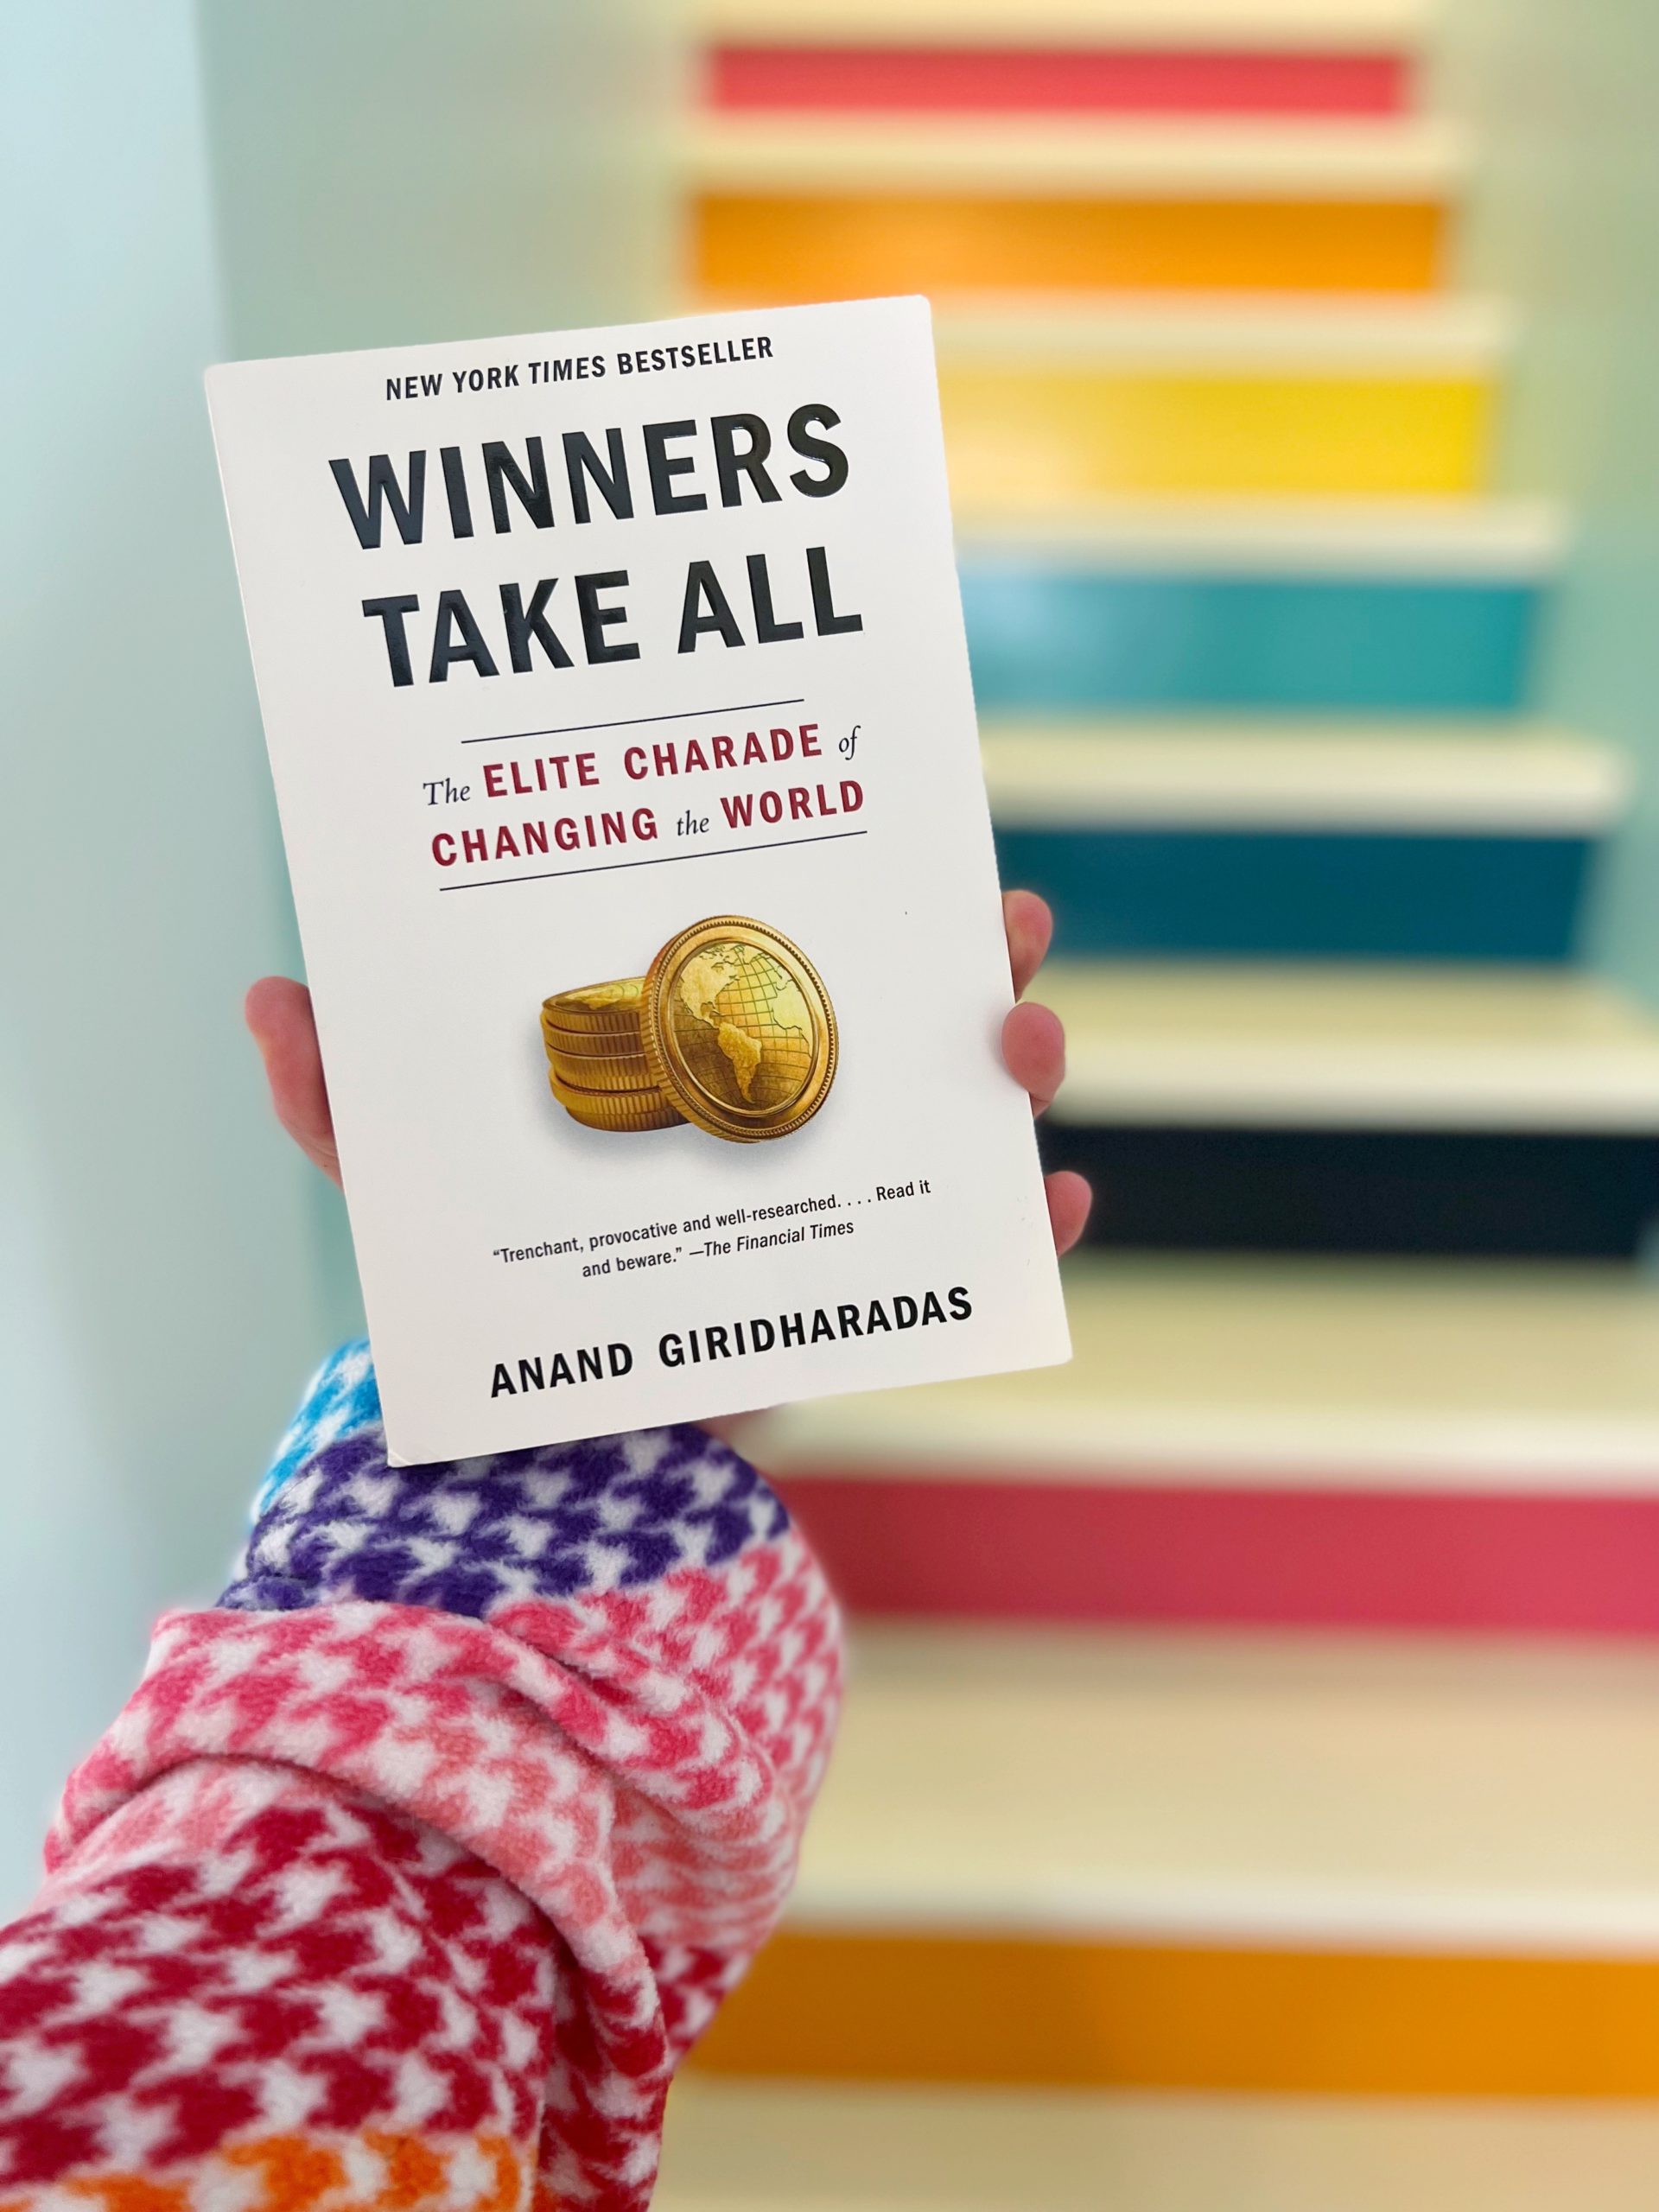 RKA holds the book "Winners Tkae All - The Elite Charade of Changing the World" by Anand Giridharadas in front of her rainbow stairs